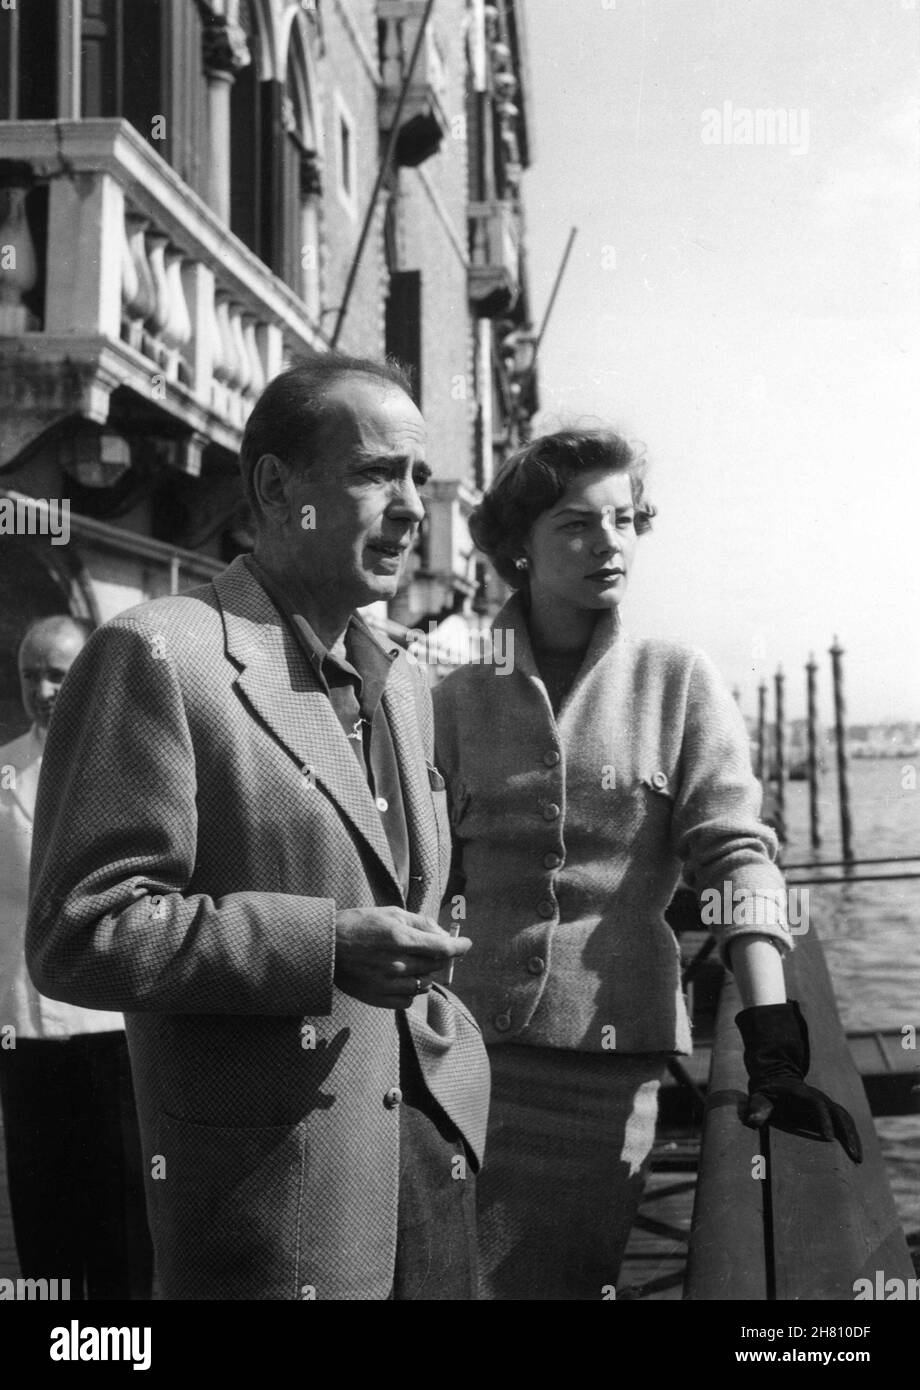 HUMPHREY BOGART and his Wife LAUREN BACALL in Venice, Italy in March 1954 following completion of his latest film THE BAREFOOT CONTESSA with Ava Gardner Stock Photo